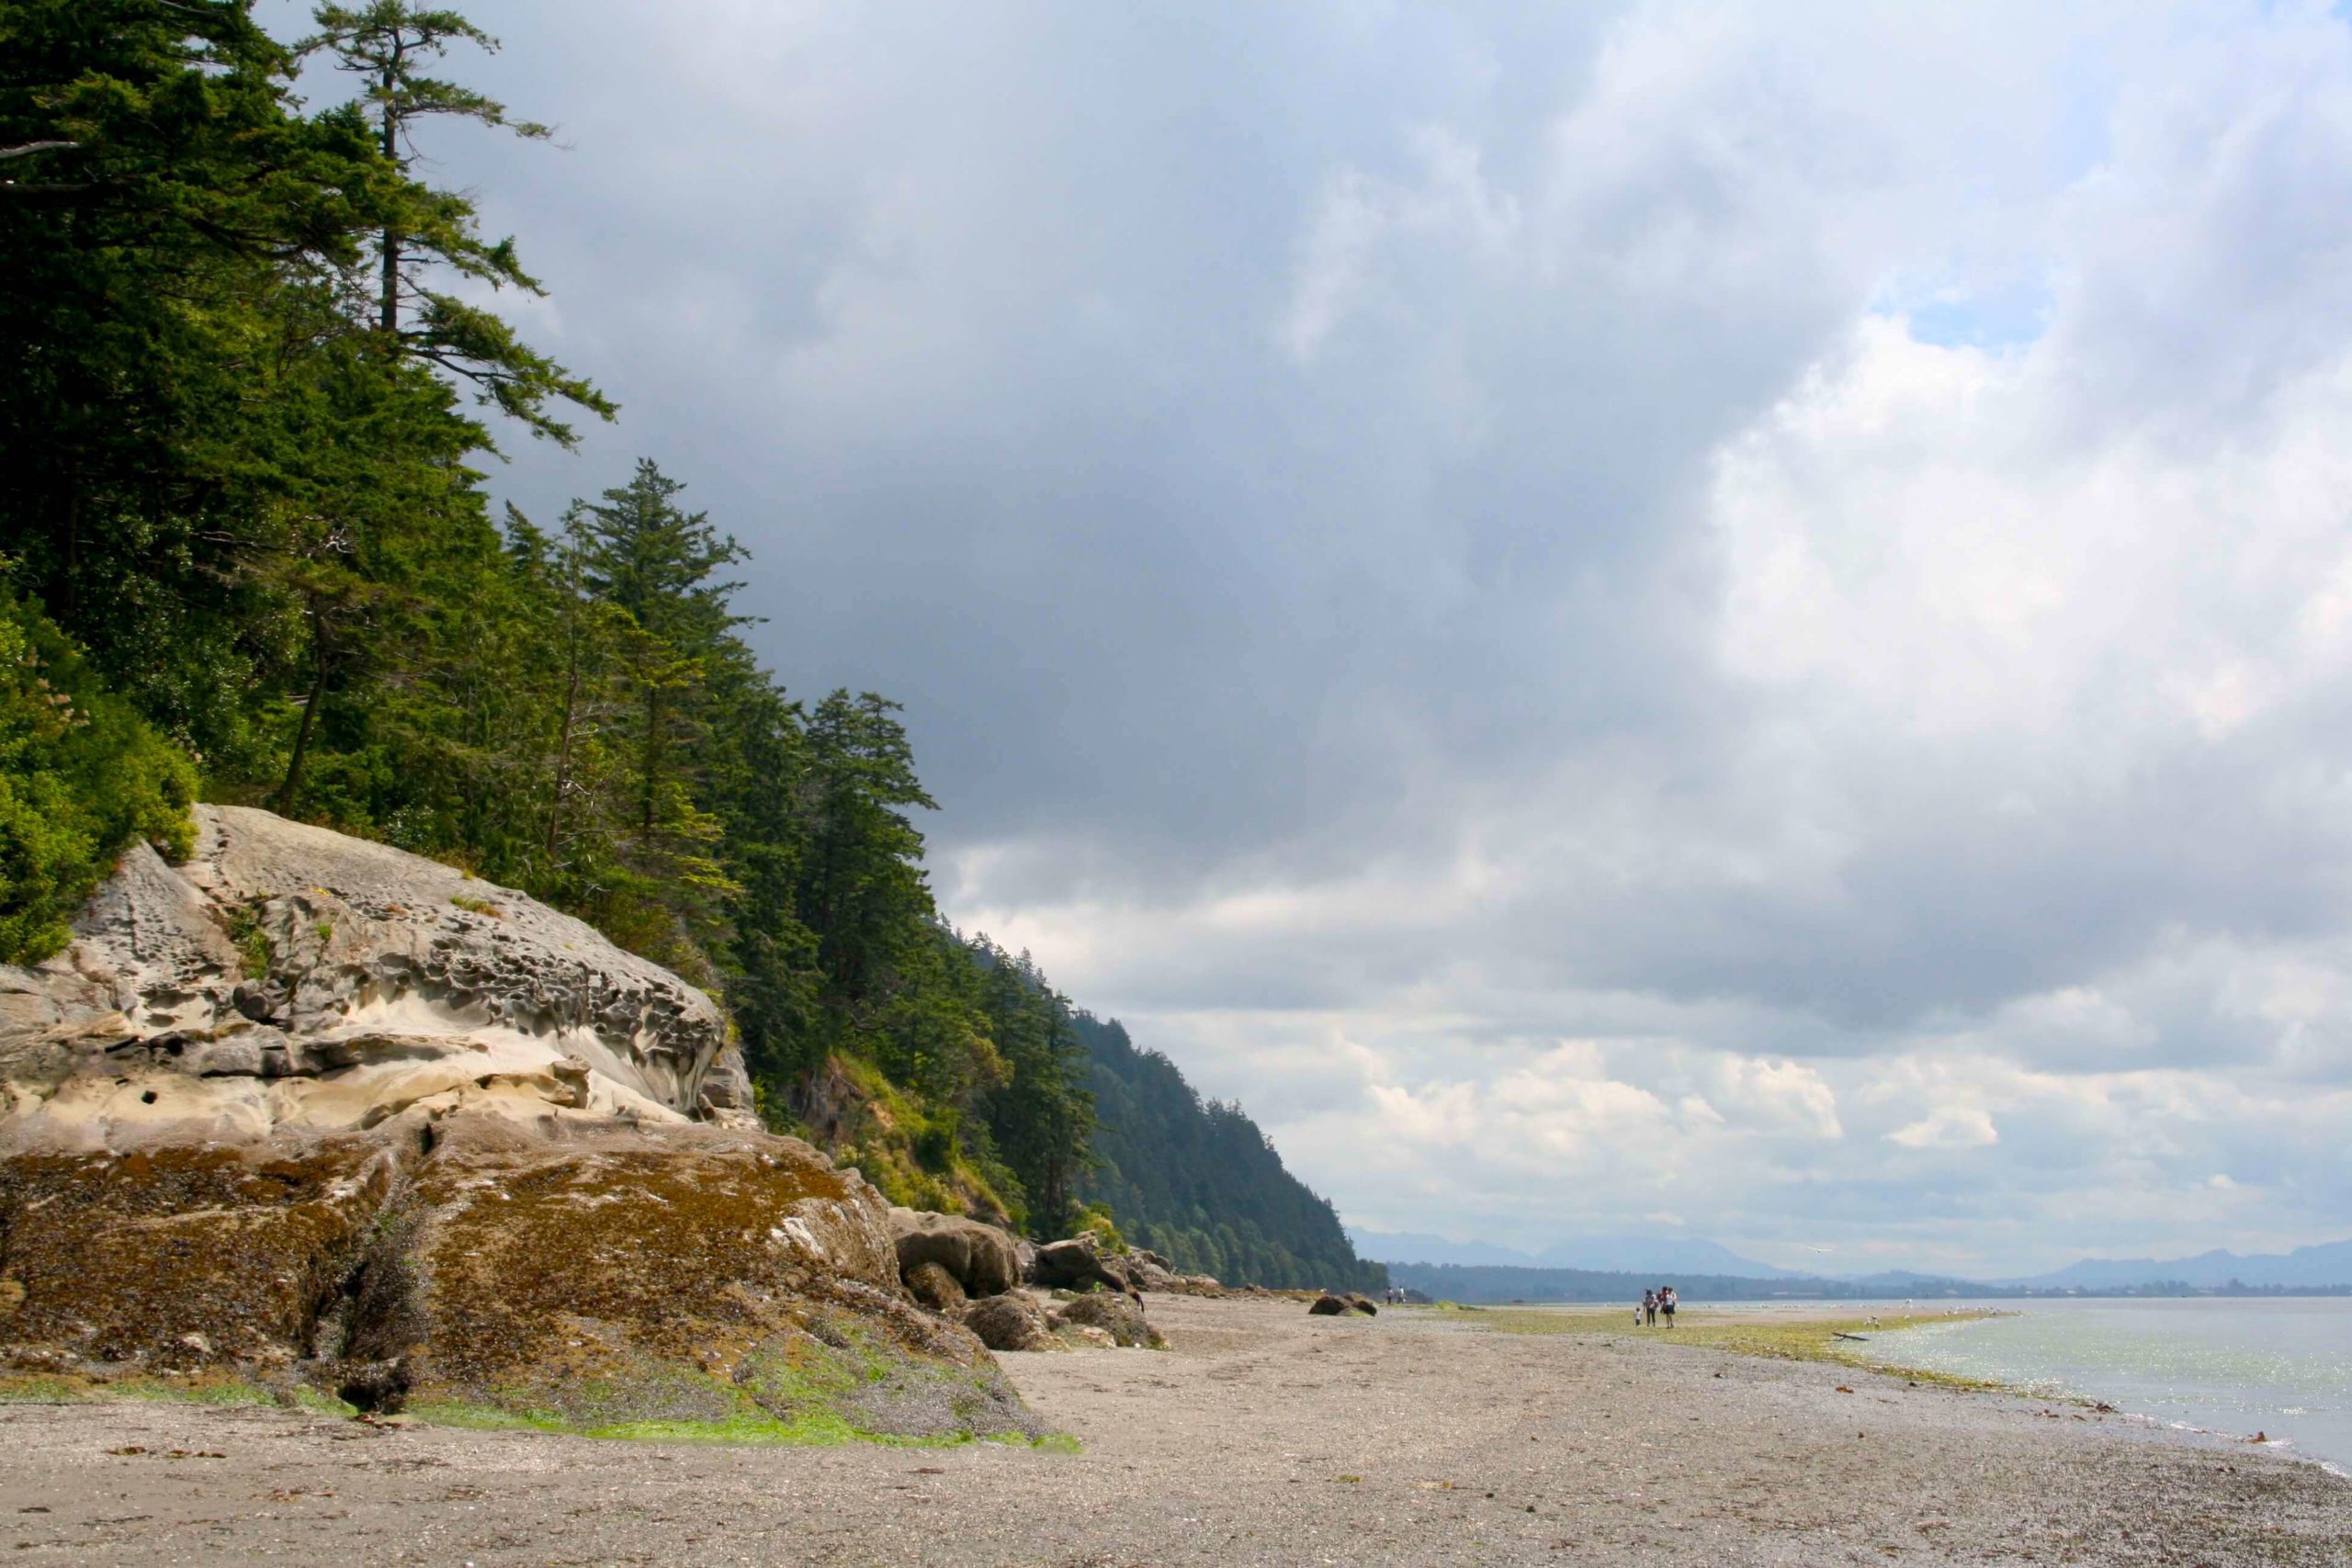 One of the best beaches in Whatcom County, Clayton Beach. A sandy beach with large rock formations and a tree line extending toward the horizon.